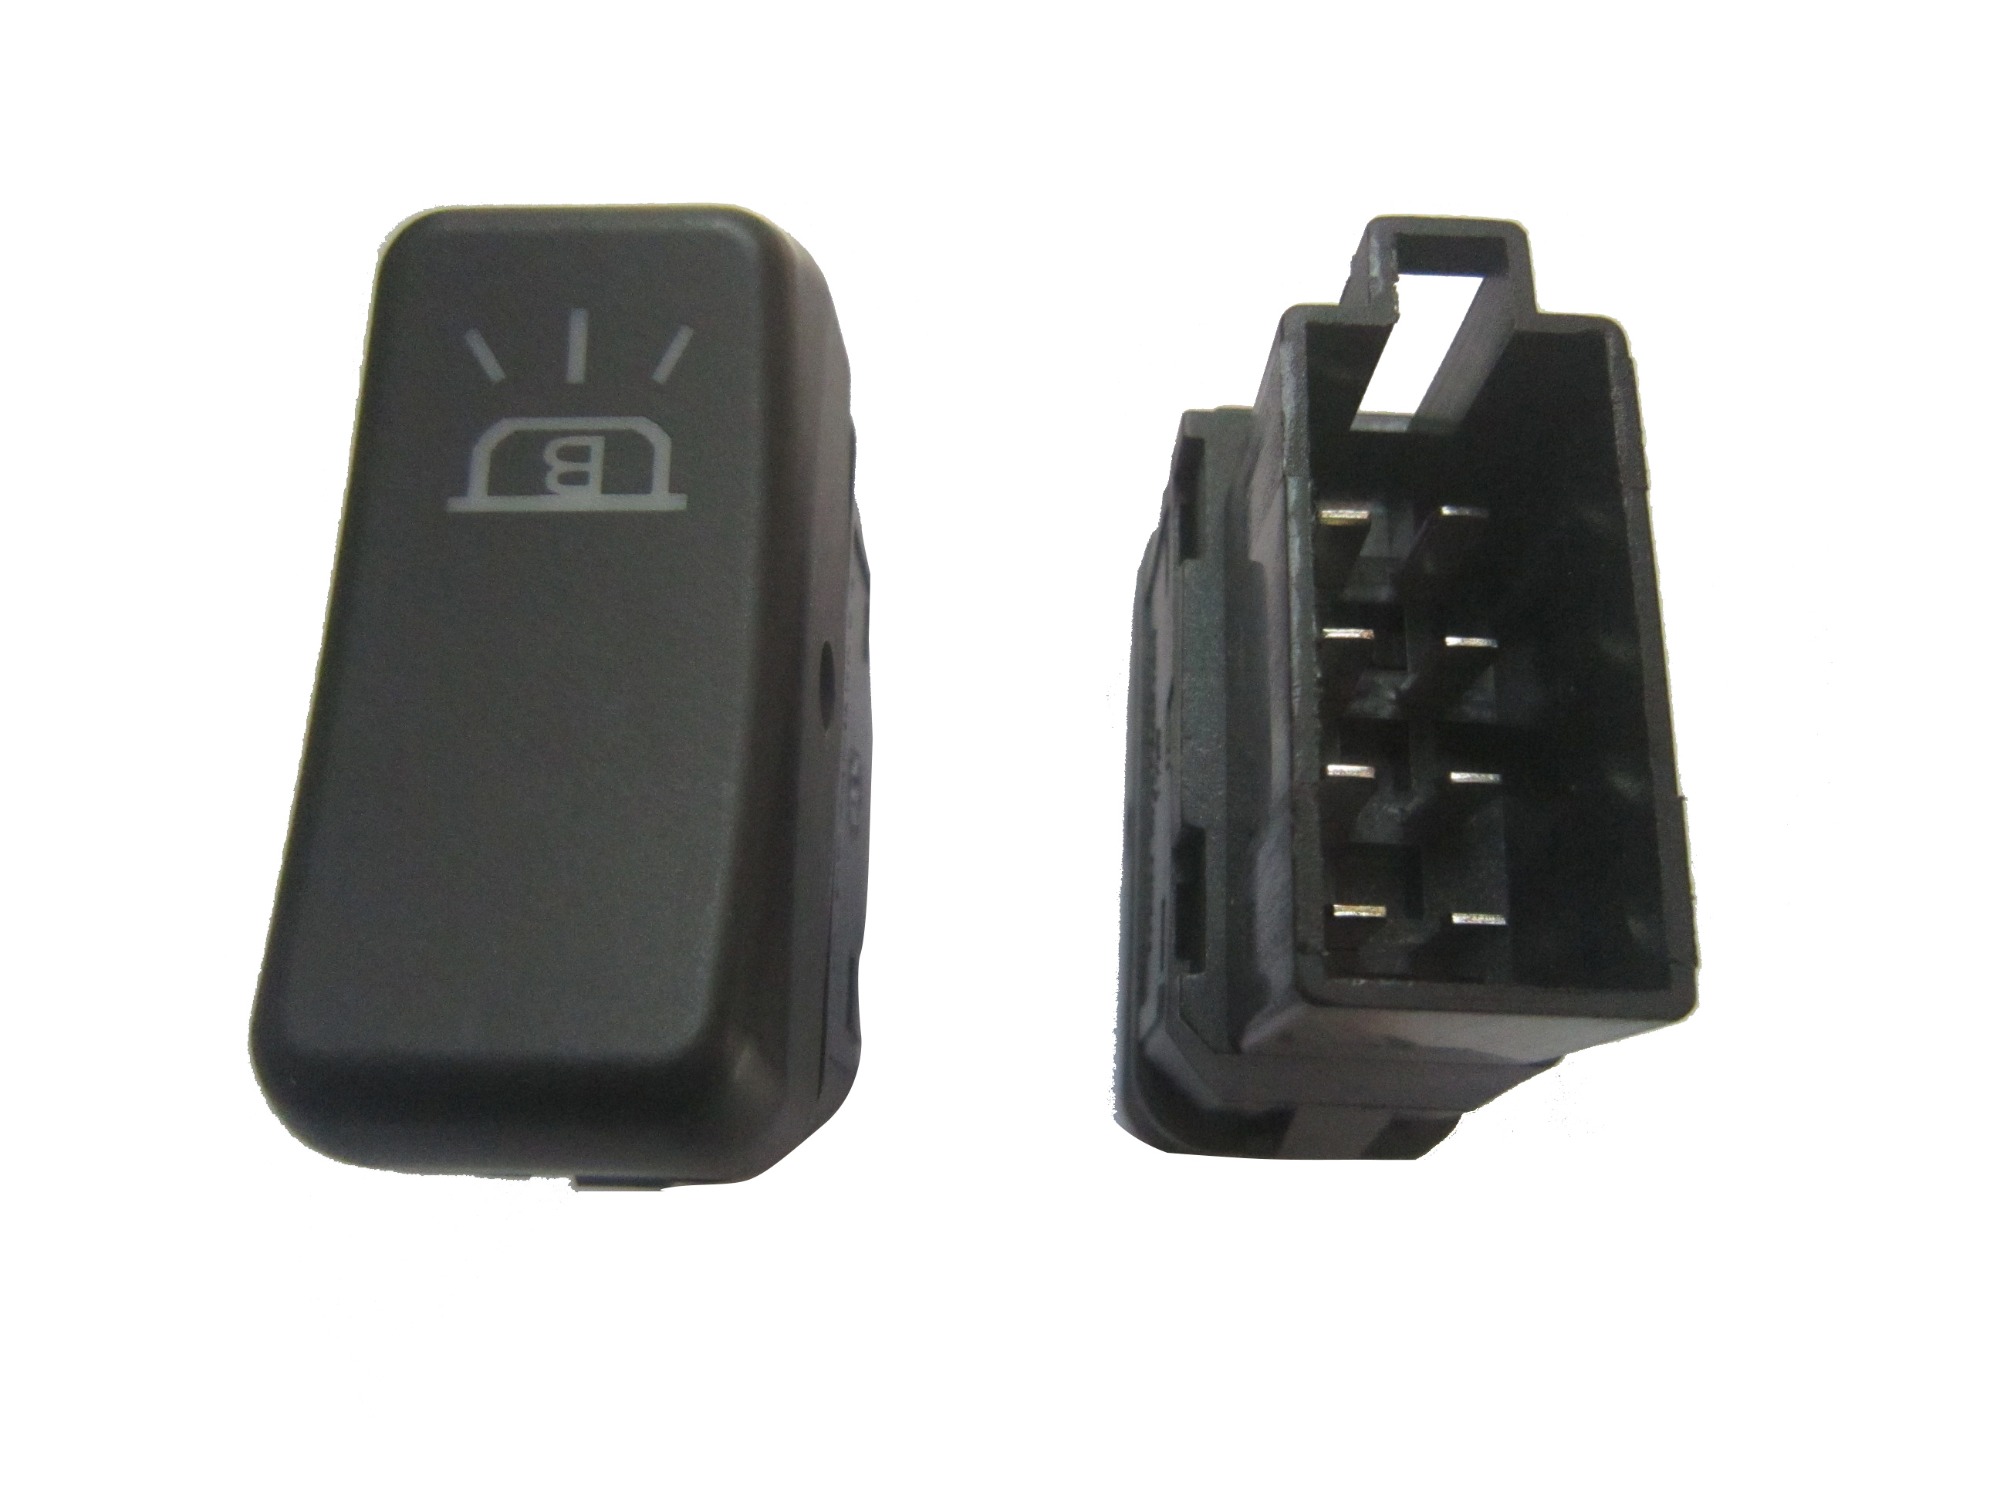 BUS DASHBOARD LIGHT SWITCHES CONTROL PANEL, BUS LIGHTS CONTROL SWITCHES BUS SERVICE COACHES SPARE PARTS